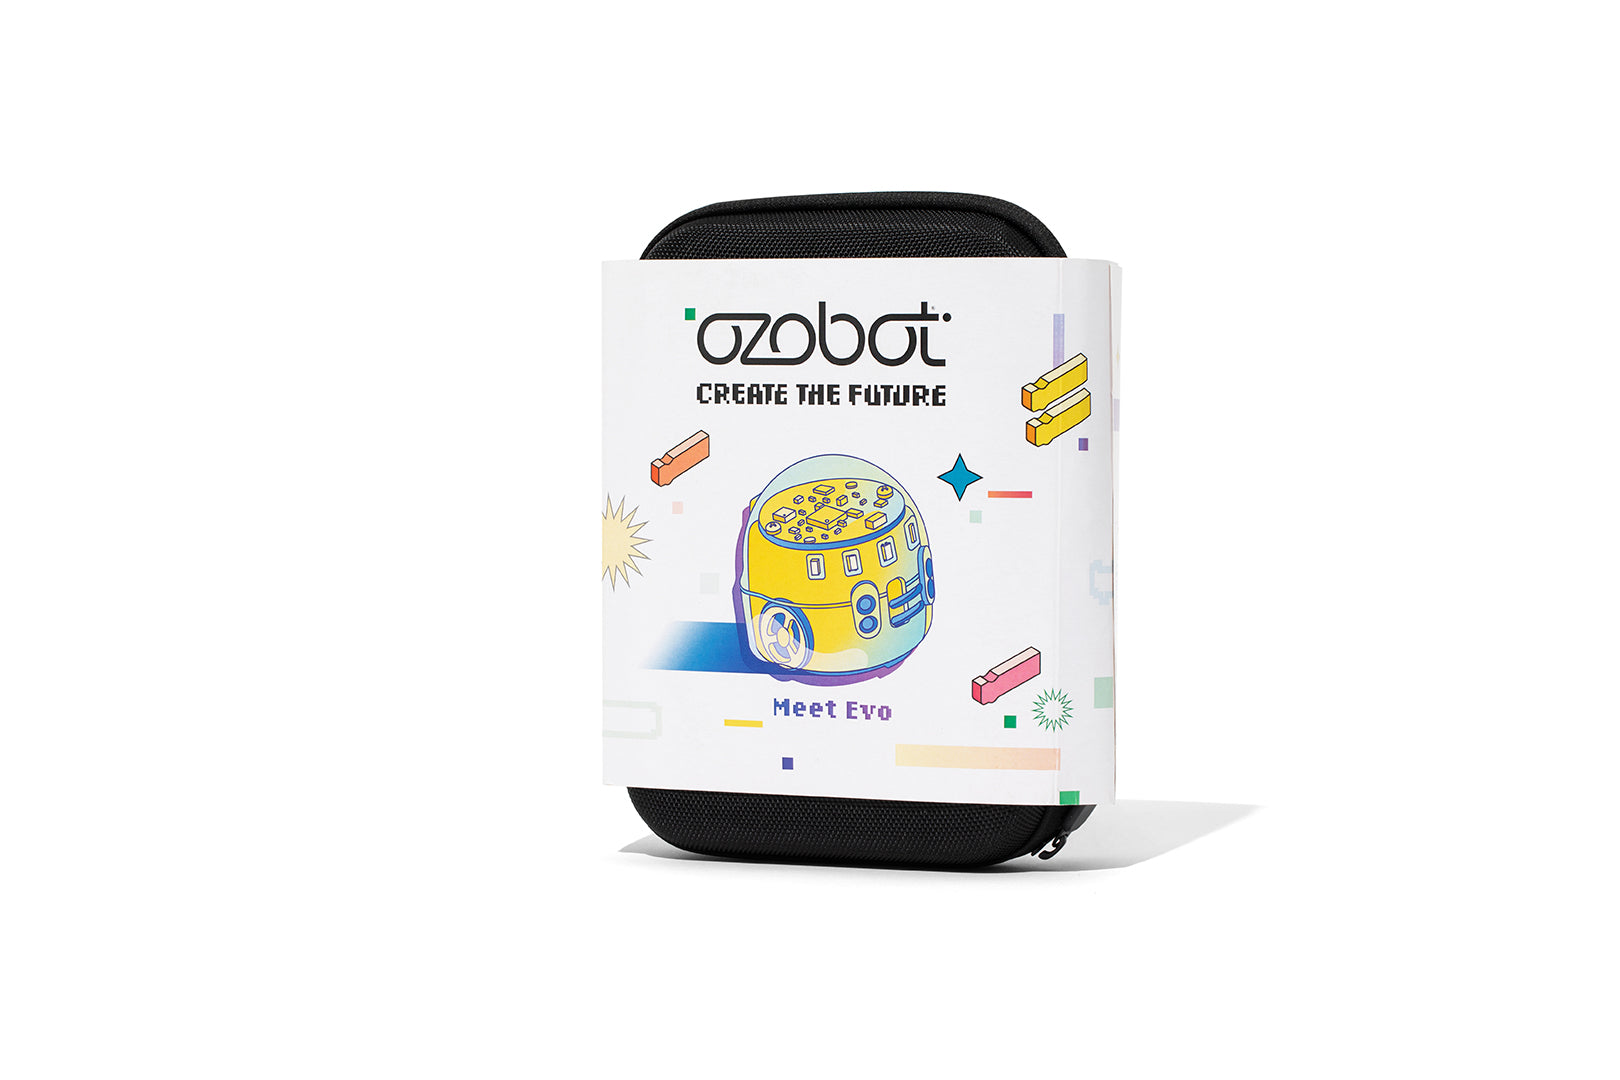 Evo by Ozobot - Apps on Google Play